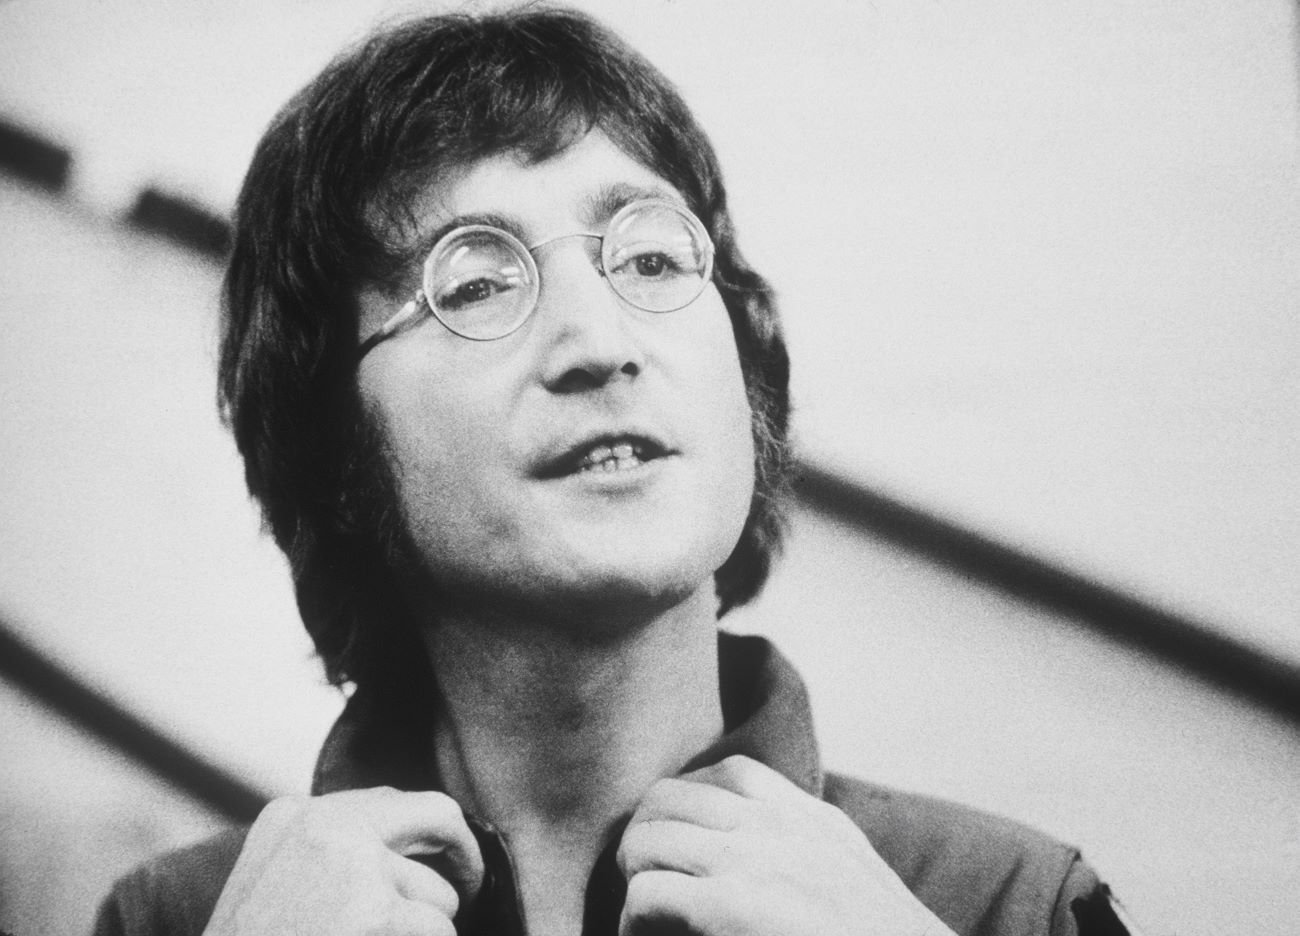 John Lennon wearing glasses and holding the collar of his shirt.